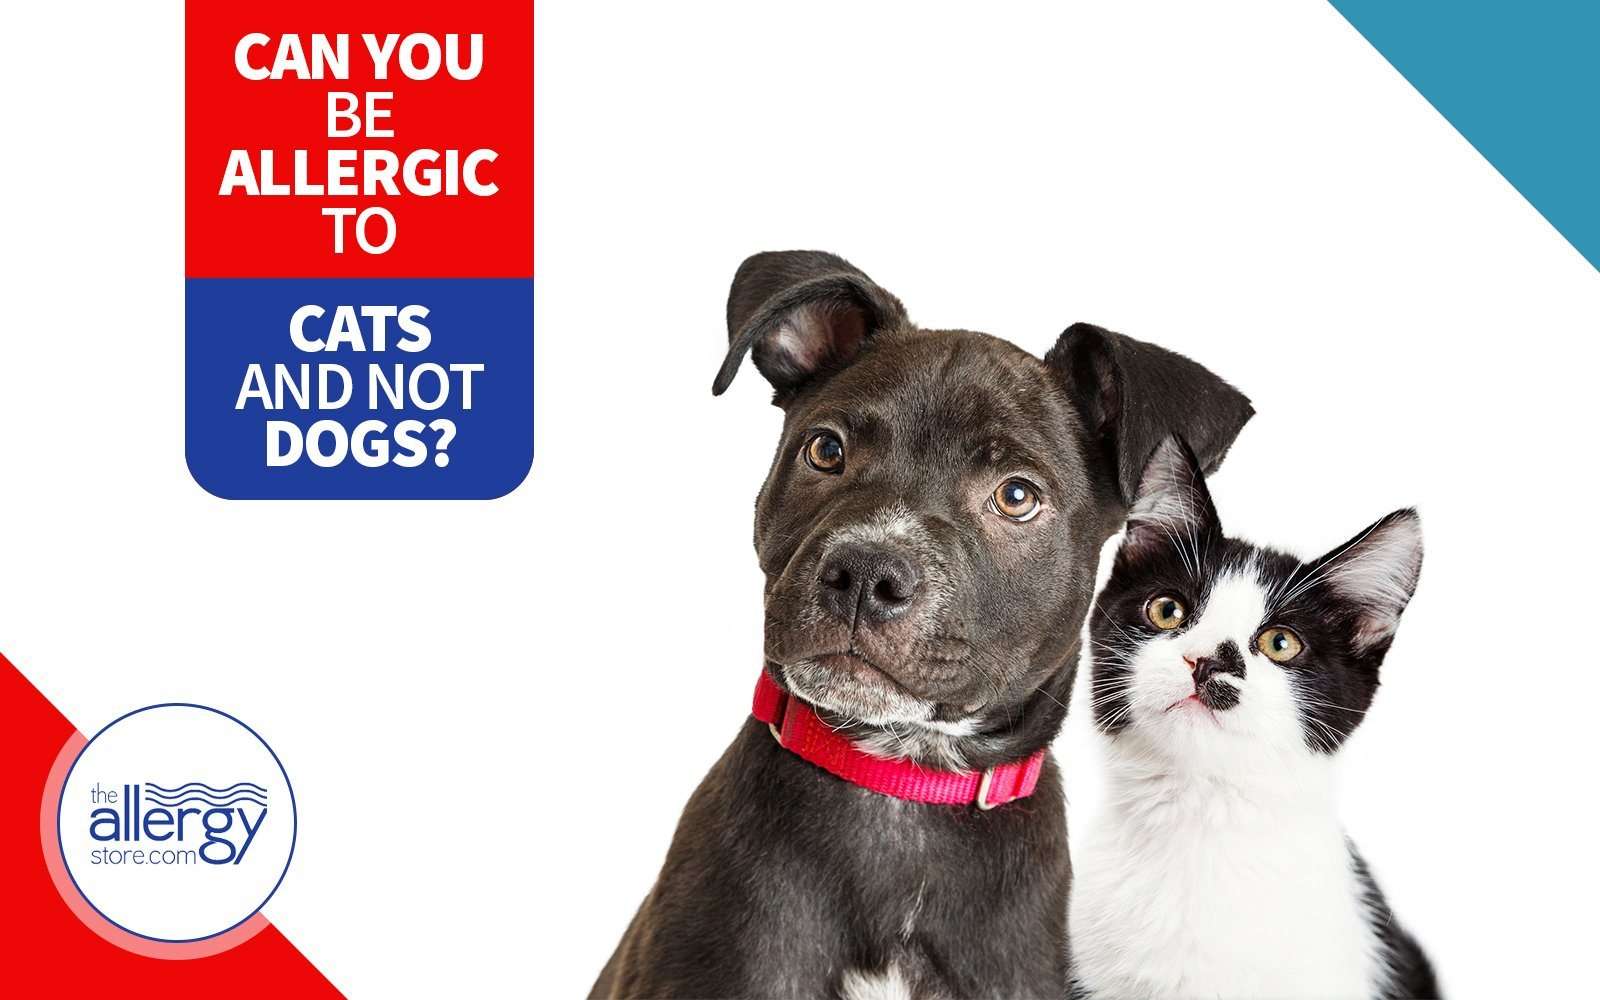 Can You Be Allergic to Cats and Not Dogs?